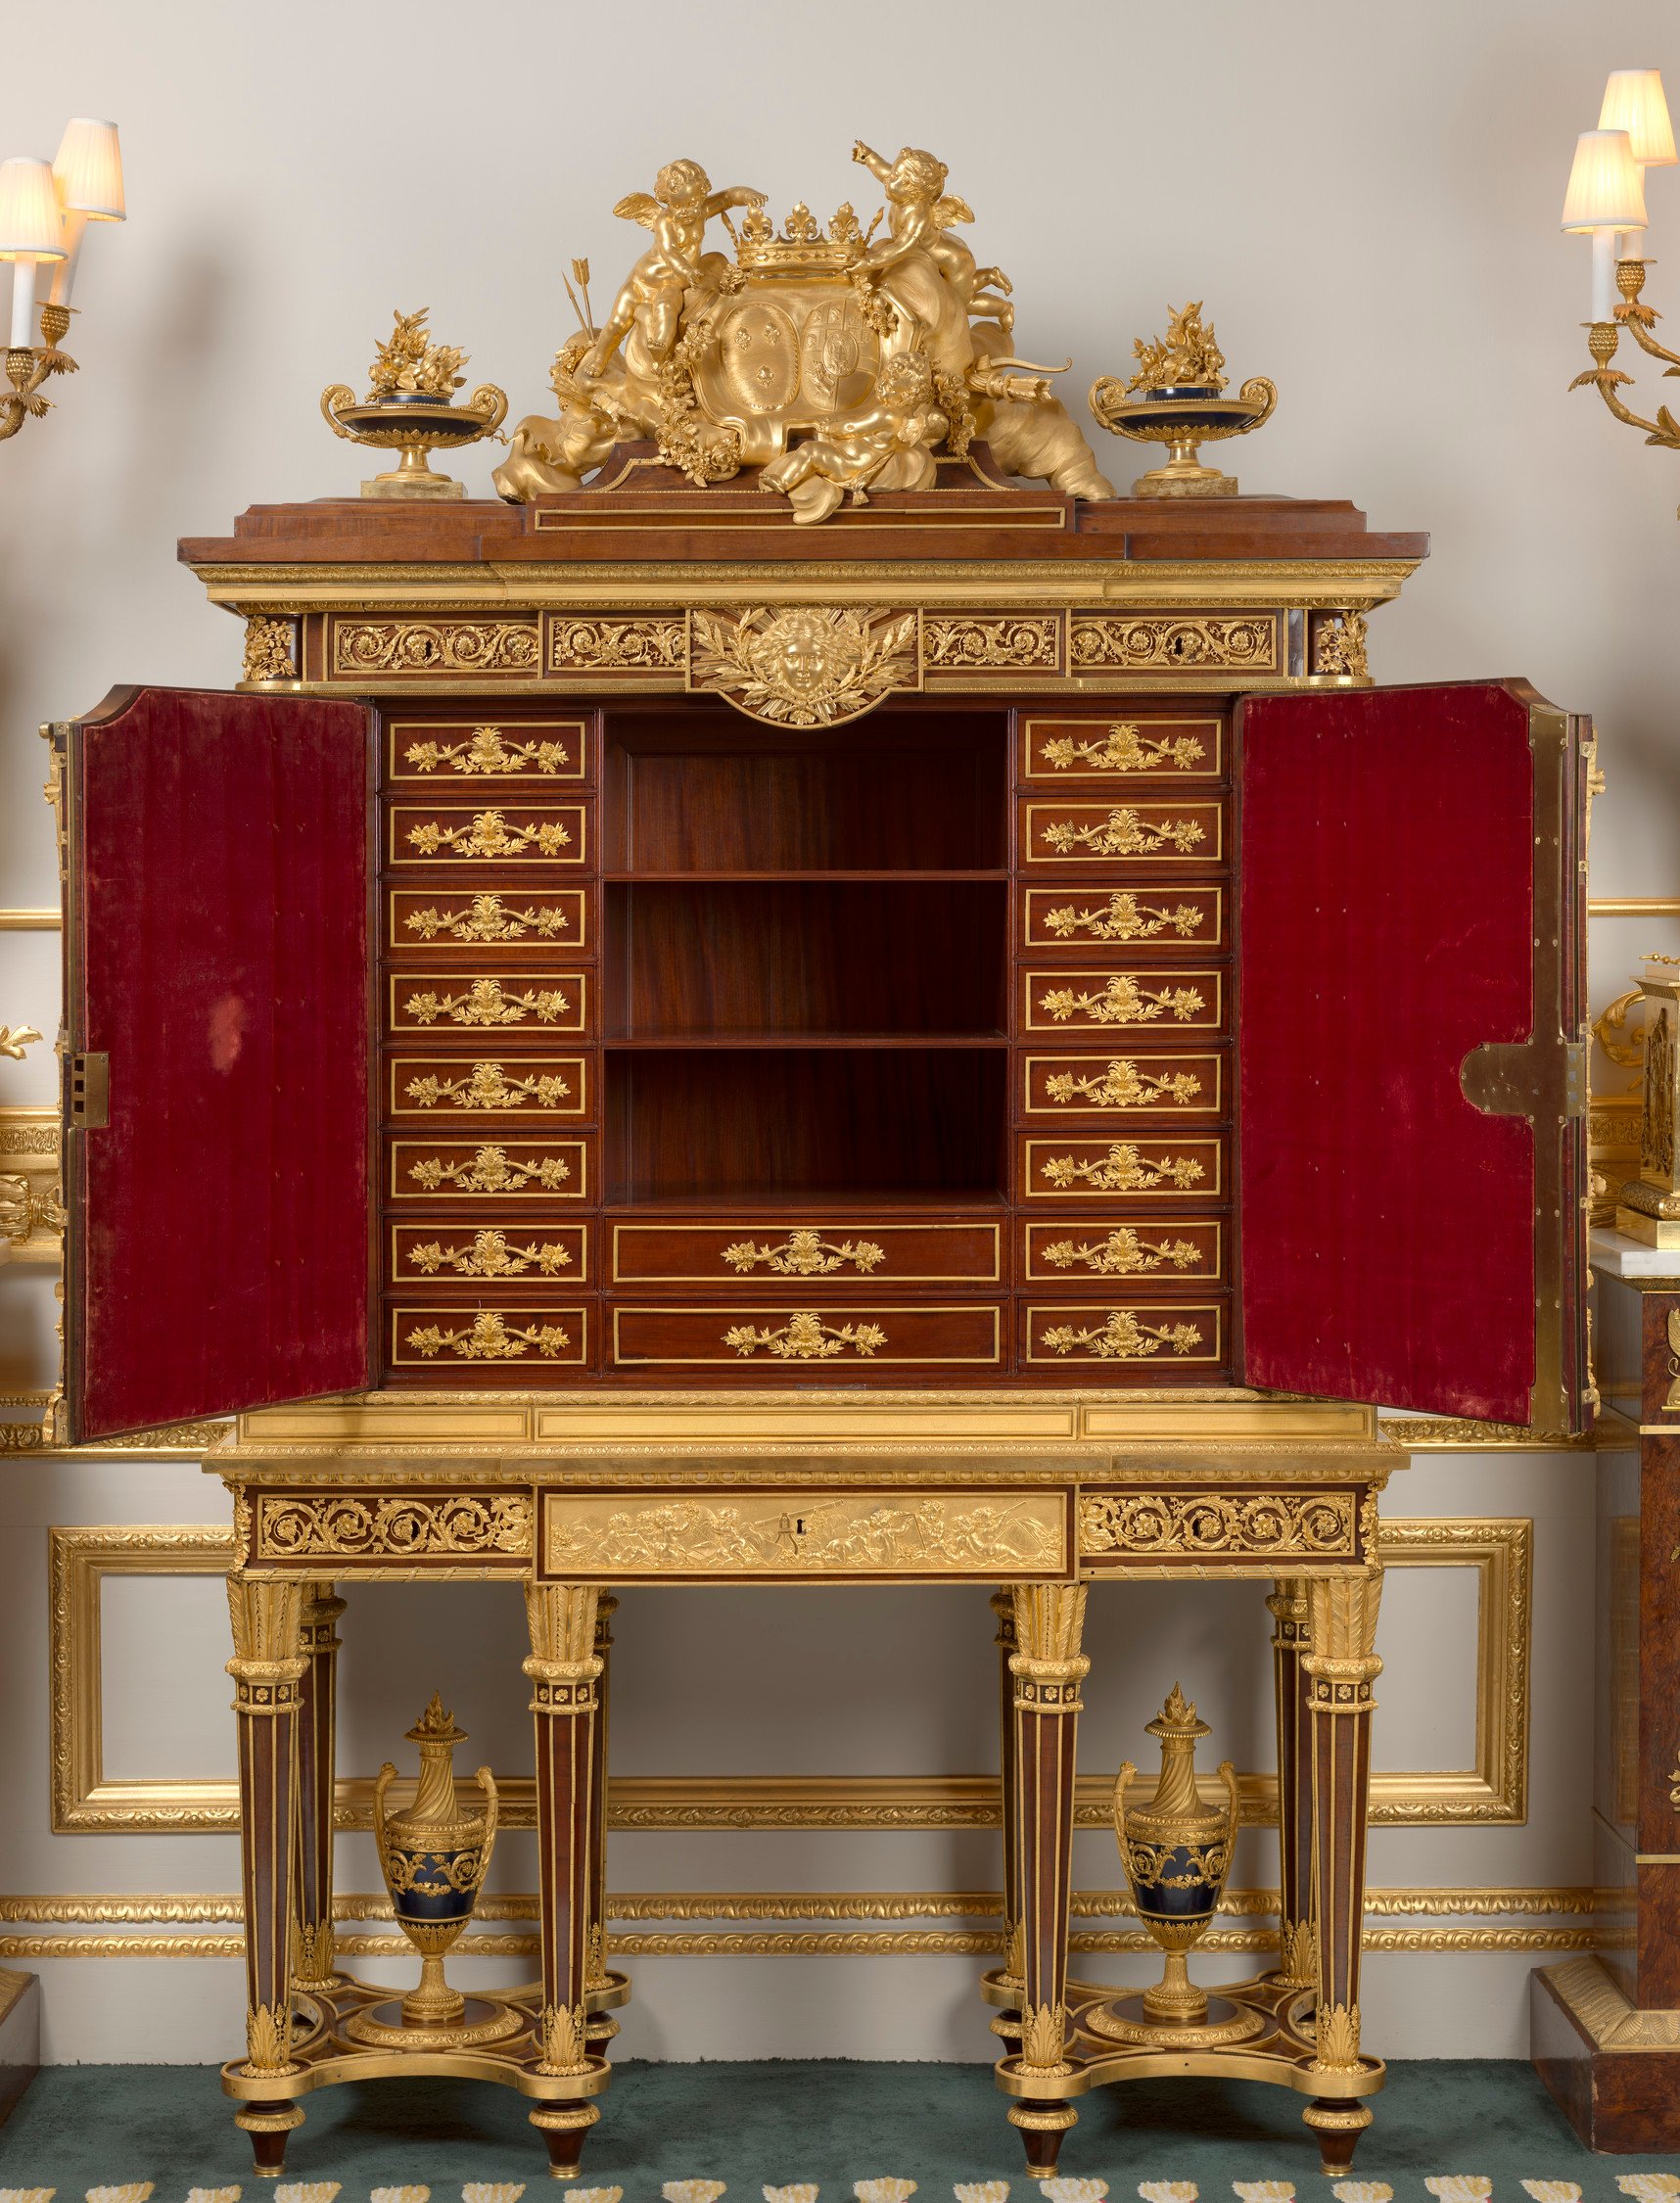 Mahogany and gilt bronze cabinet; superstructure with a group of putti holding a crown above conjoined coats-of-arms of the Bourbon and Savoy families flanked by vases. The frieze with three drawers; above two cabinet doors with scrolling foliage enclosin